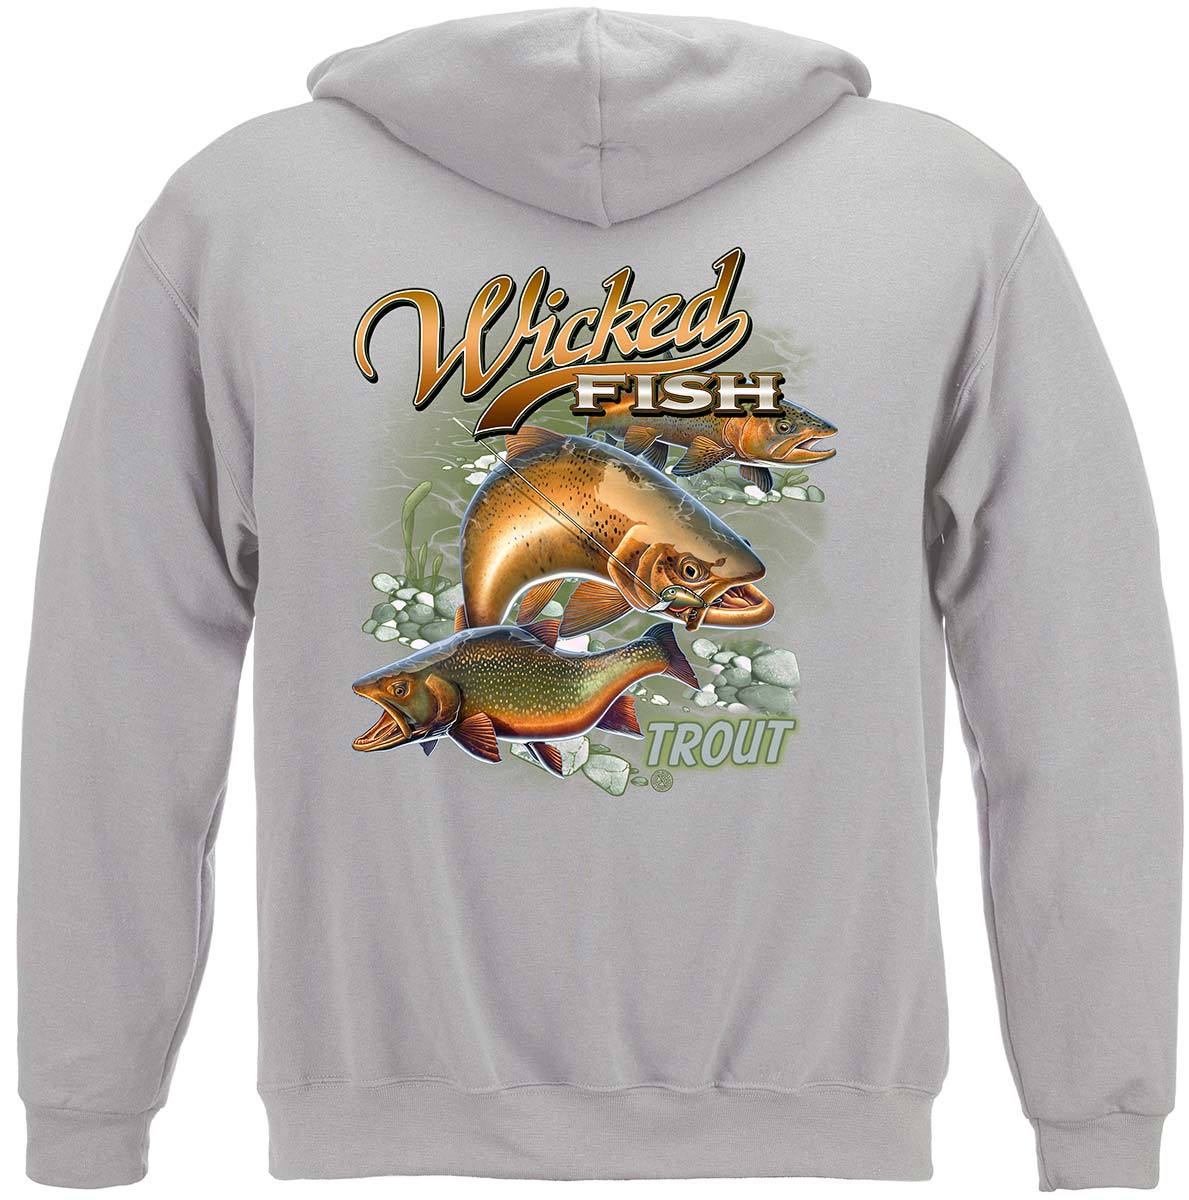 Wicked Fish Trout Premium Hooded Sweat Shirt